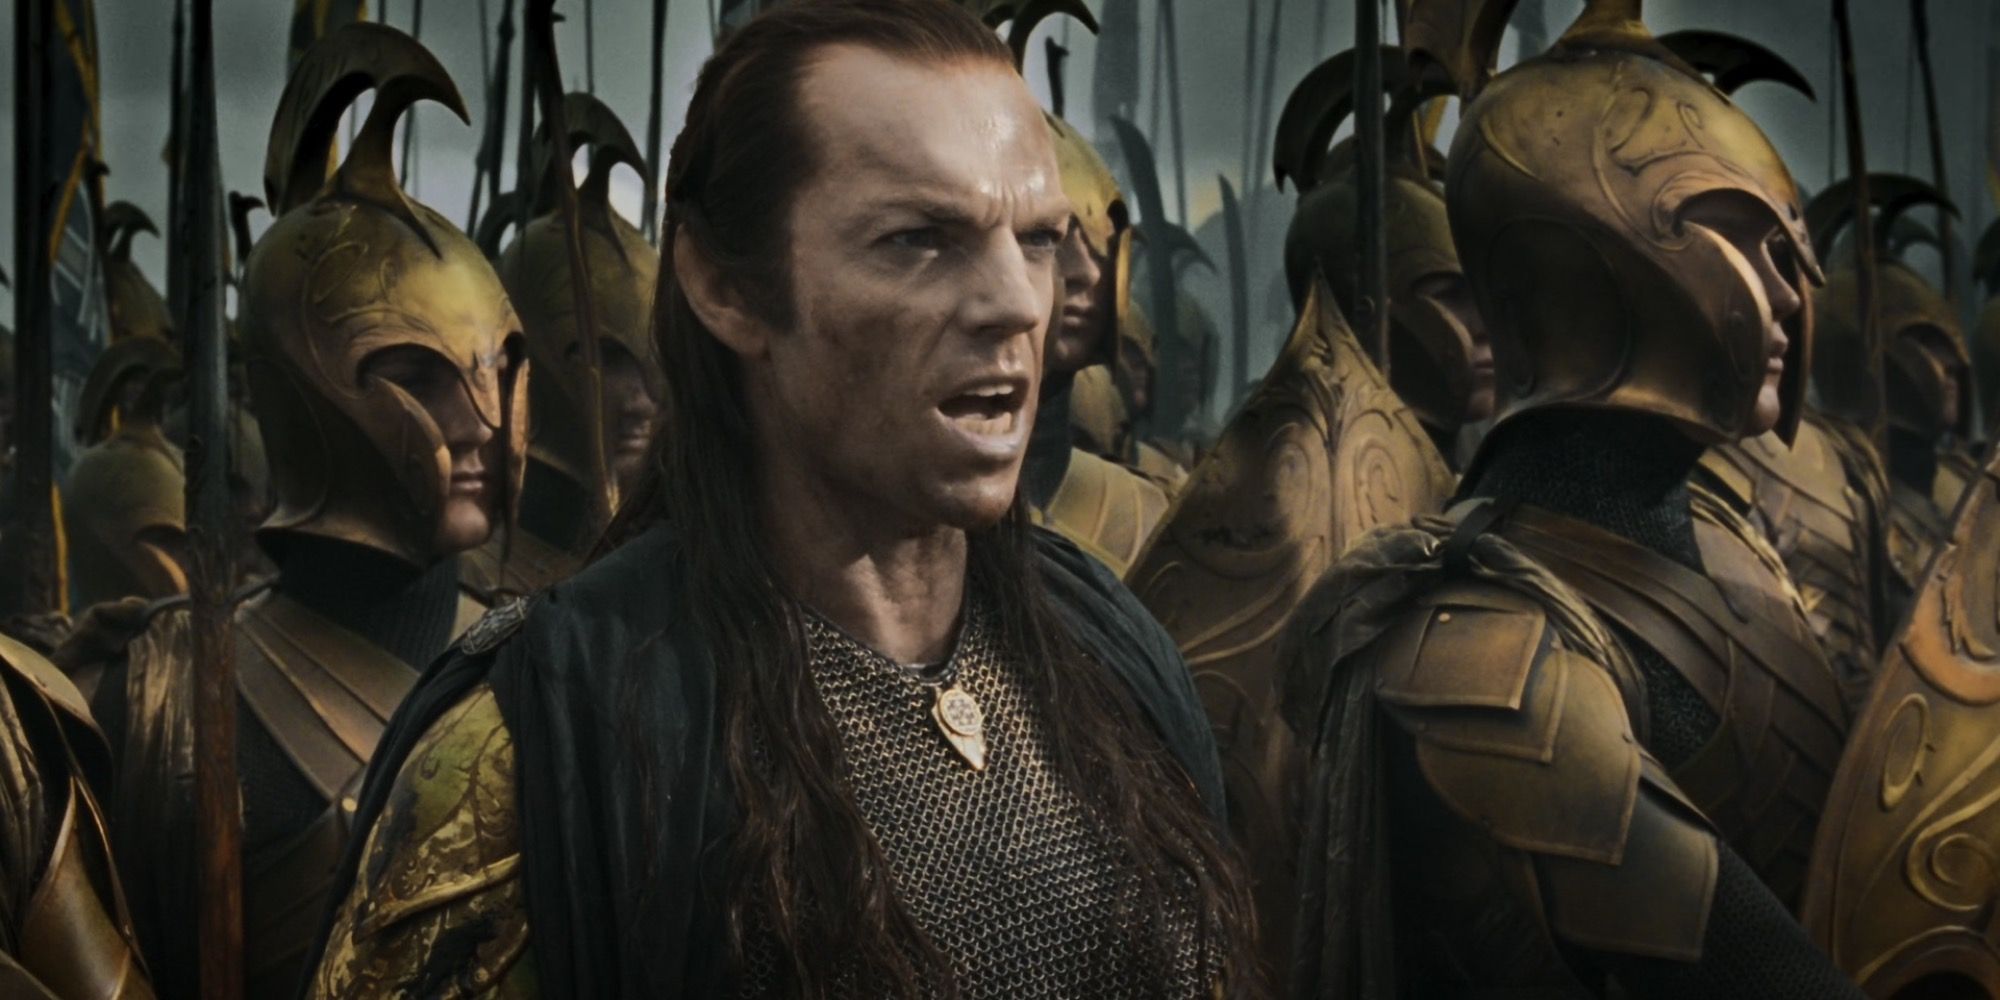 Elrond commands the elves in the Last Alliance 